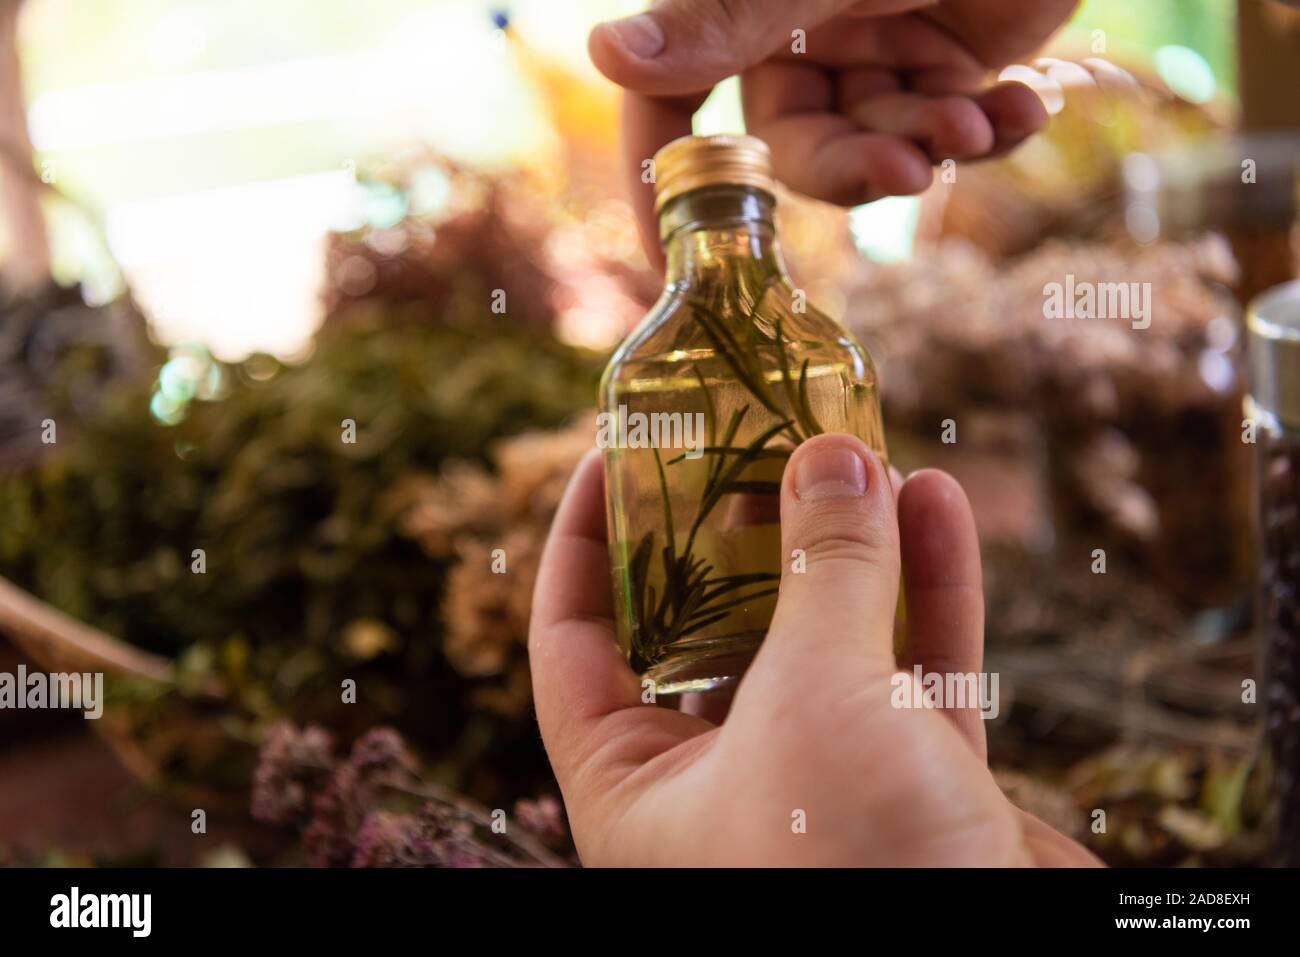 potion bottle in hand of herbalist Stock Photo